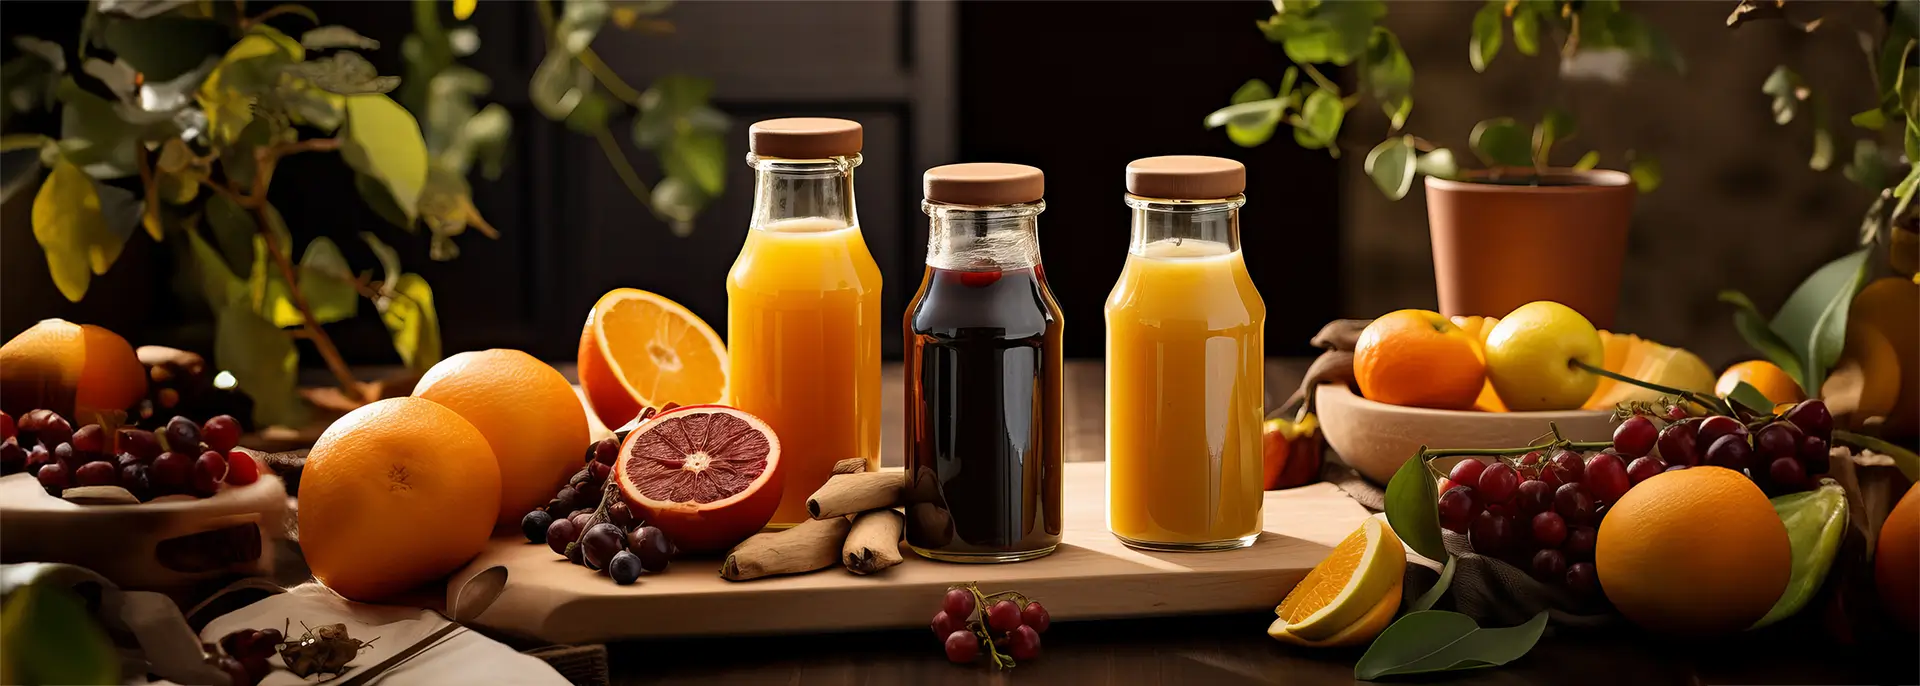 Natural juices in bottles served with fruits on a wooden cutting board on a brown table